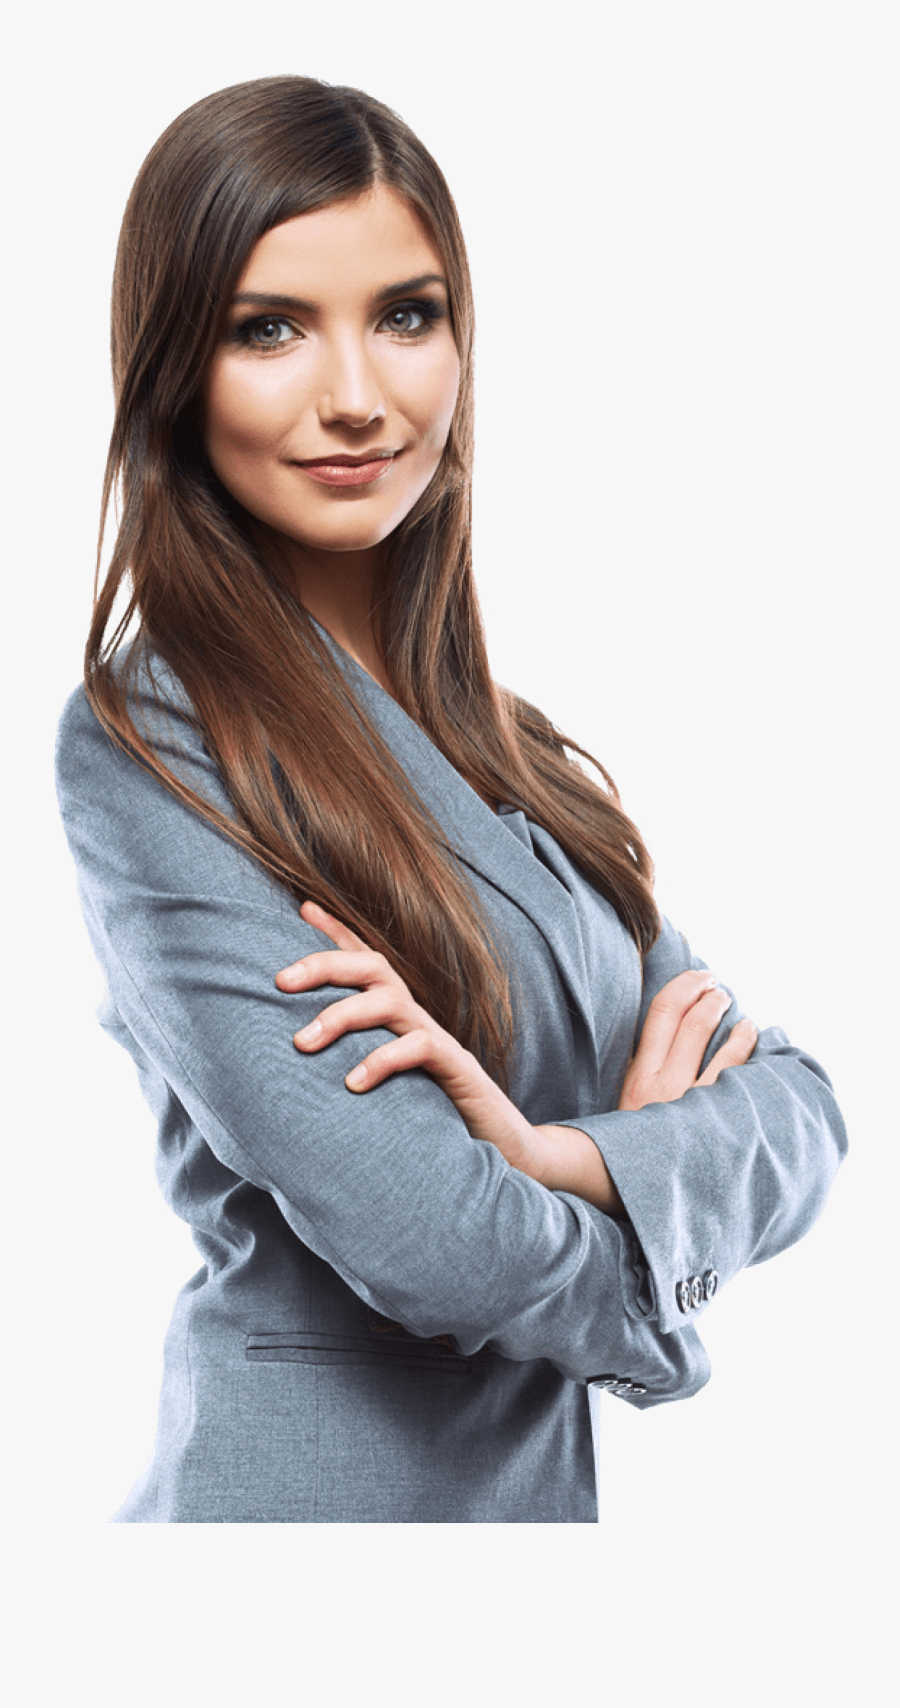 Woman Png Office - Stock Photo Of A Woman, Transparent Clipart